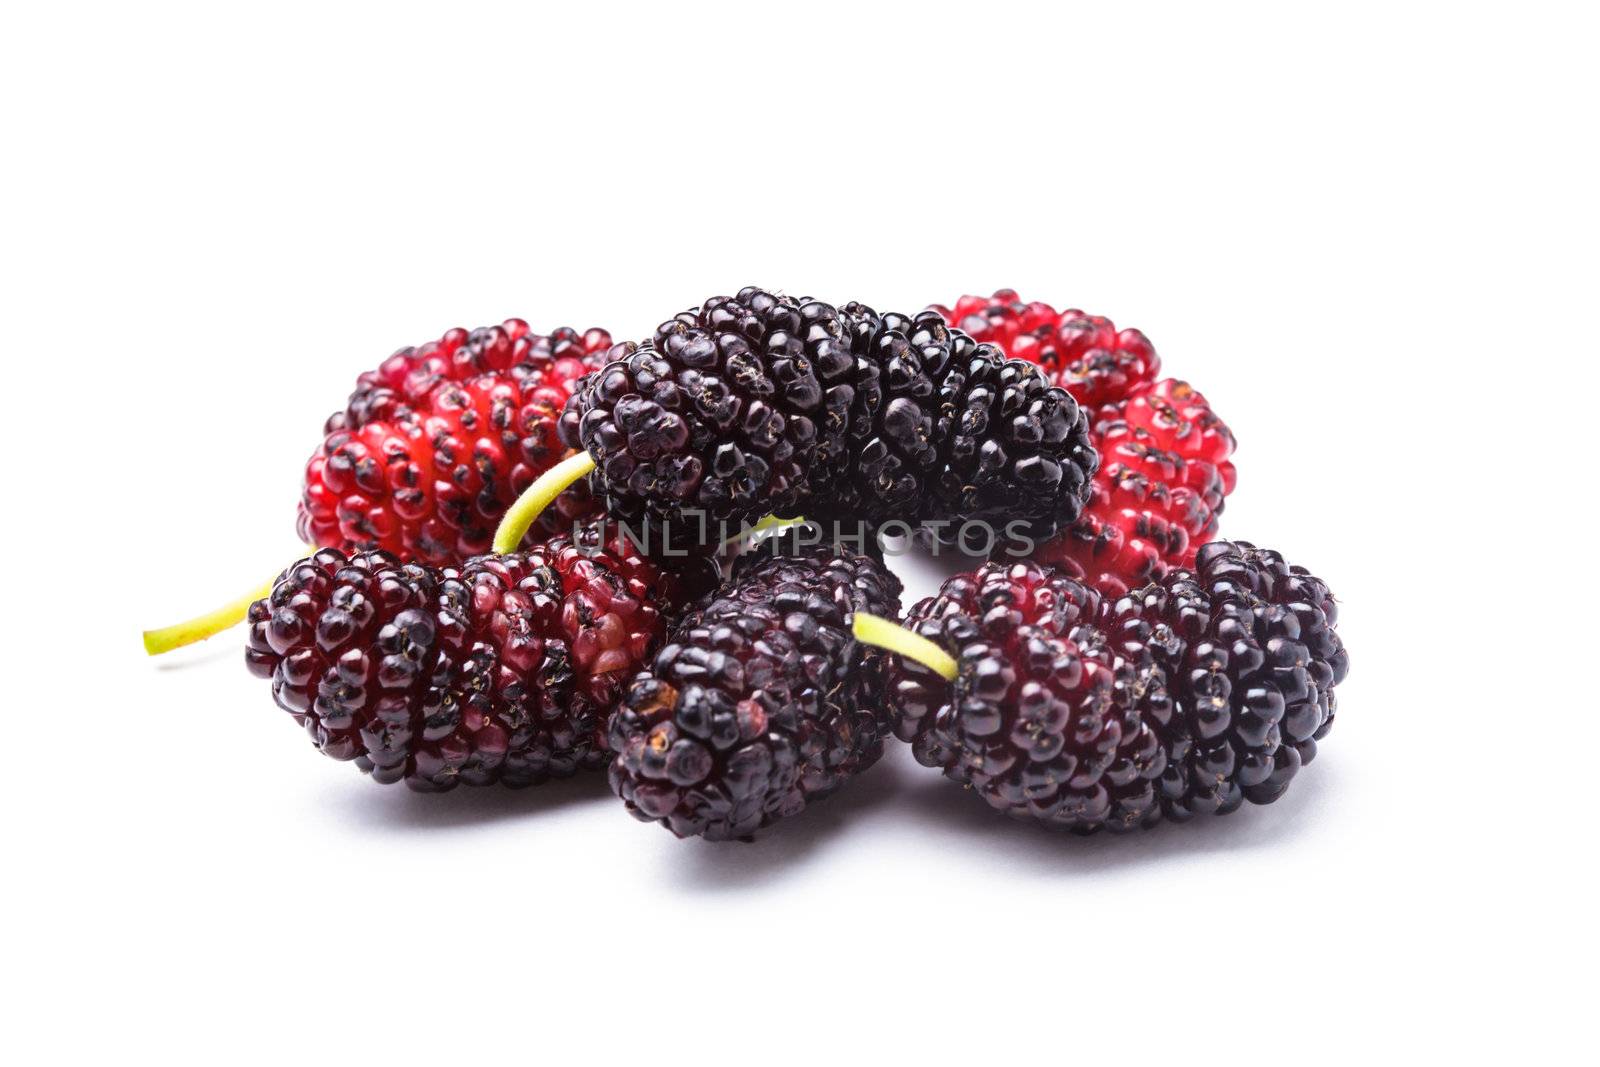 Mulberry berries close up on white background